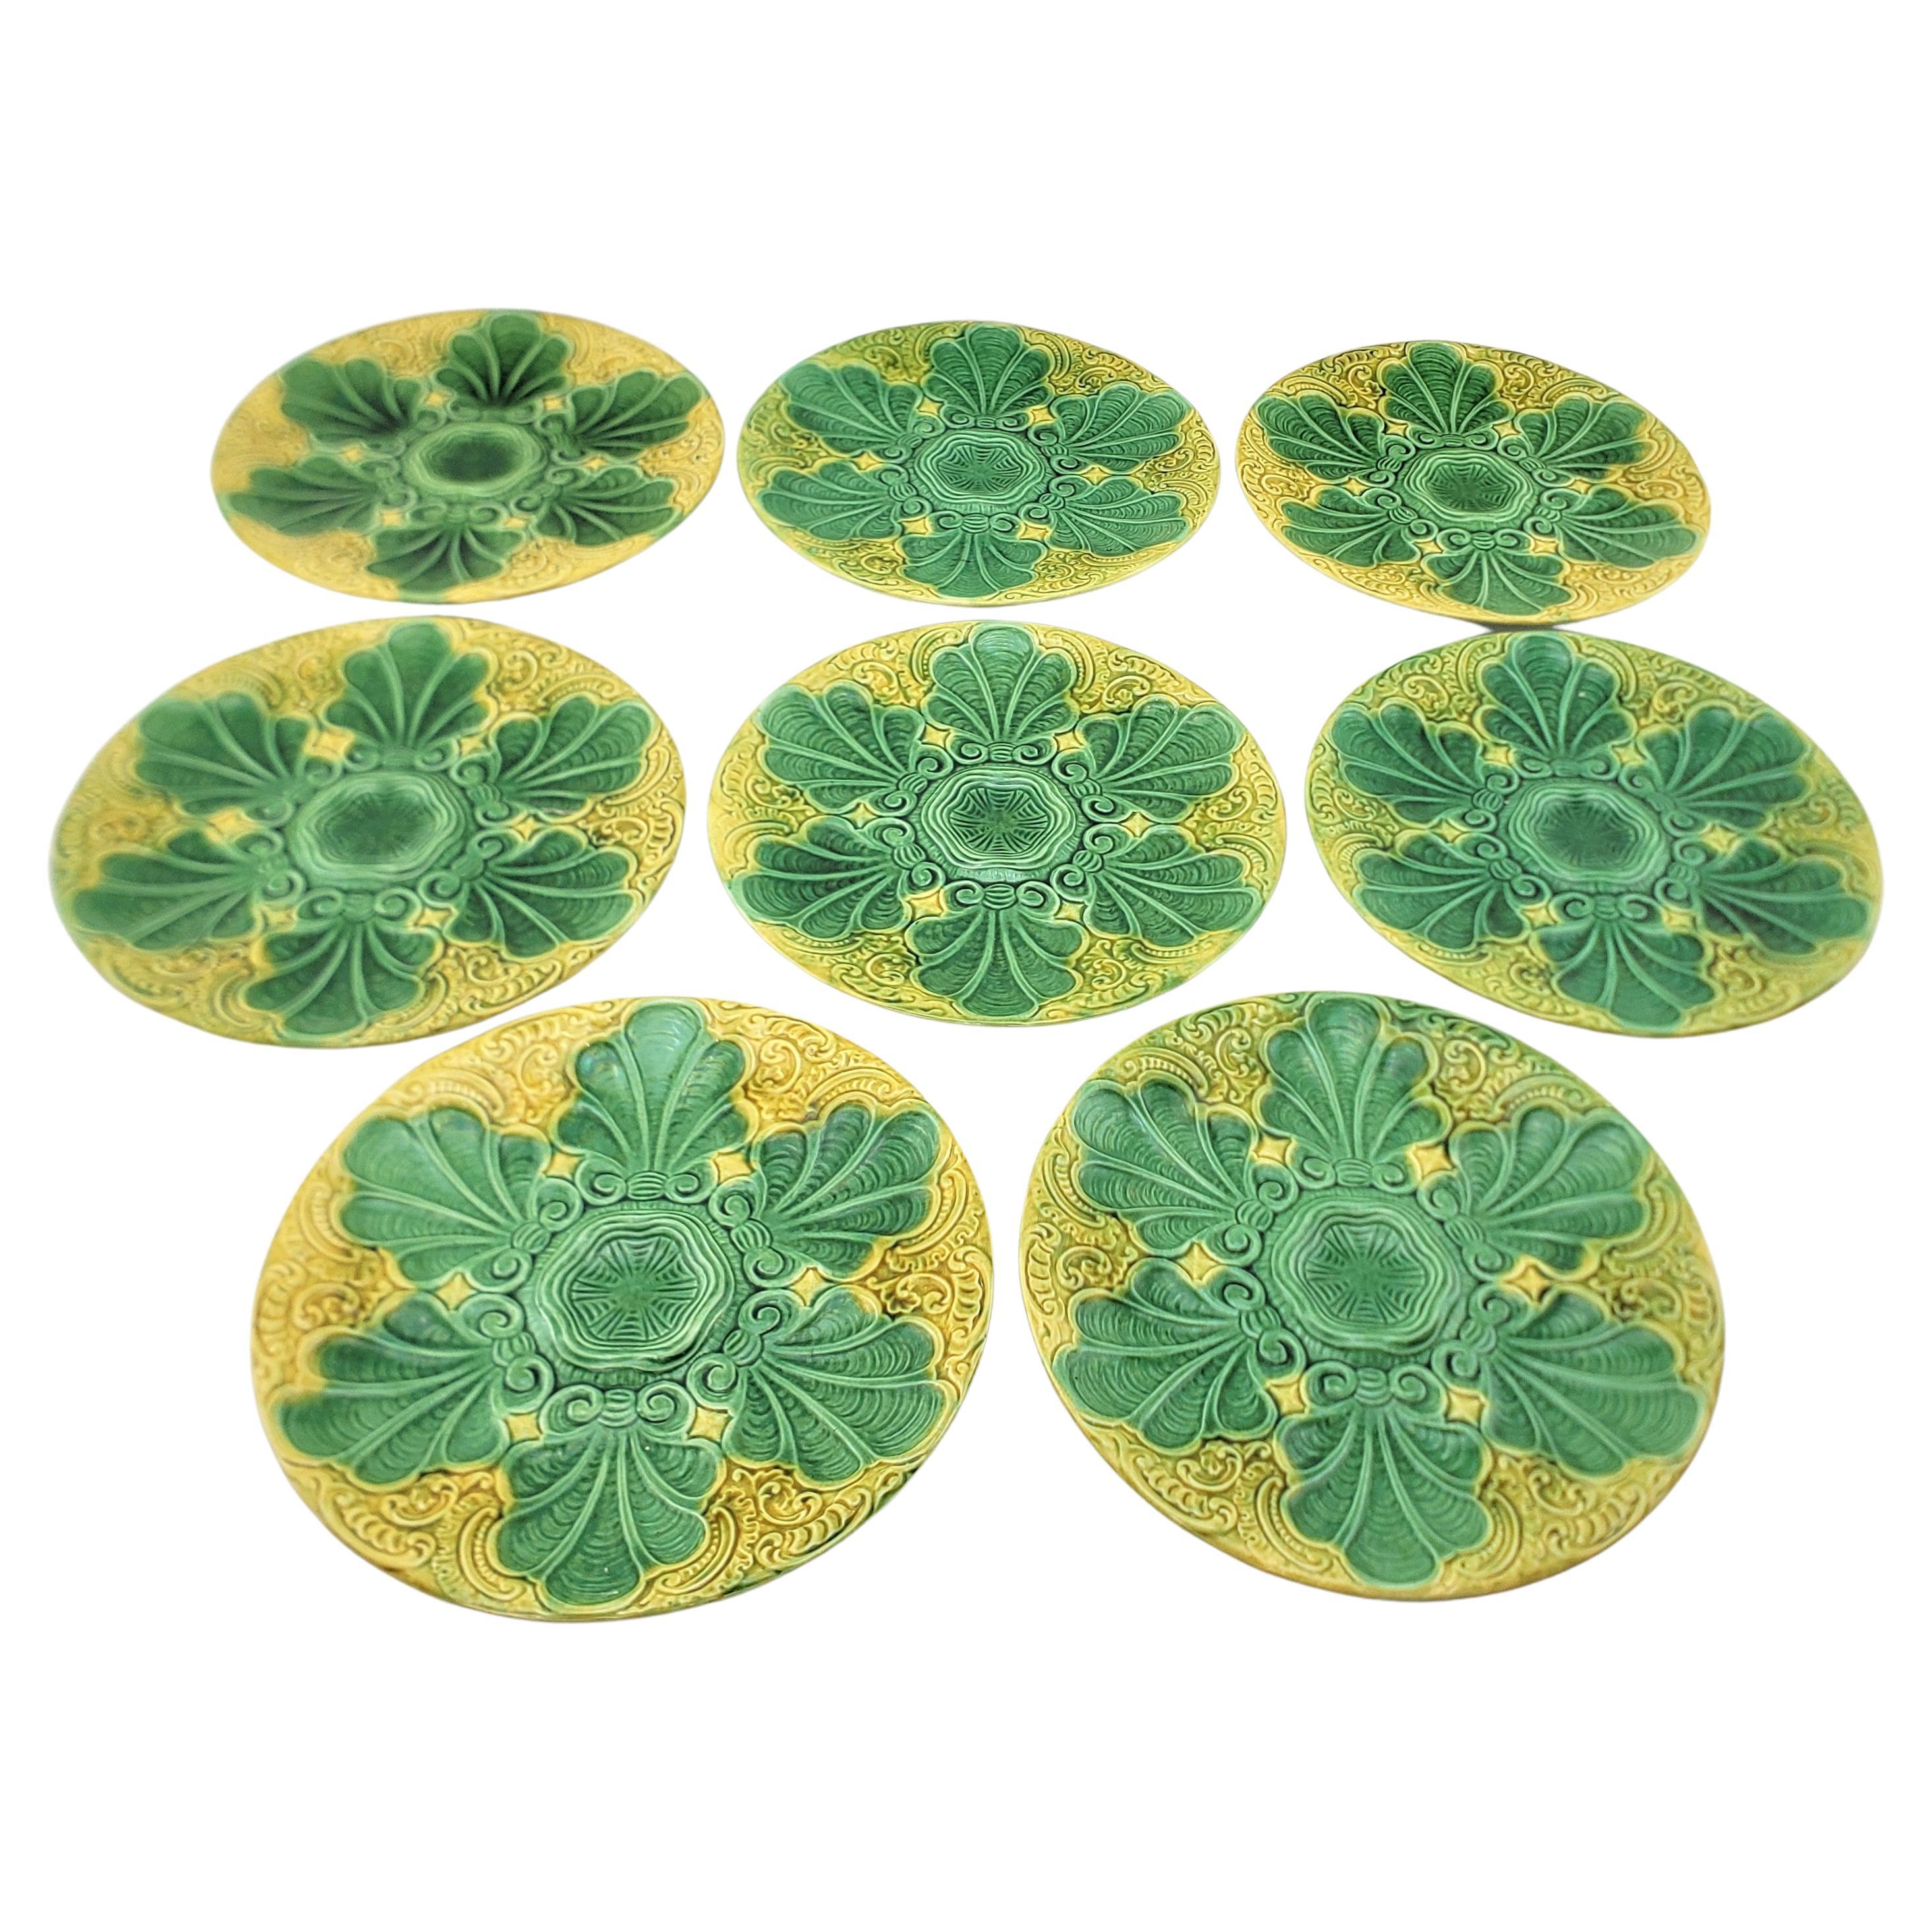 Antique French Majolica Oyster or Seafood Serving Plates Set, 8 Pieces For Sale